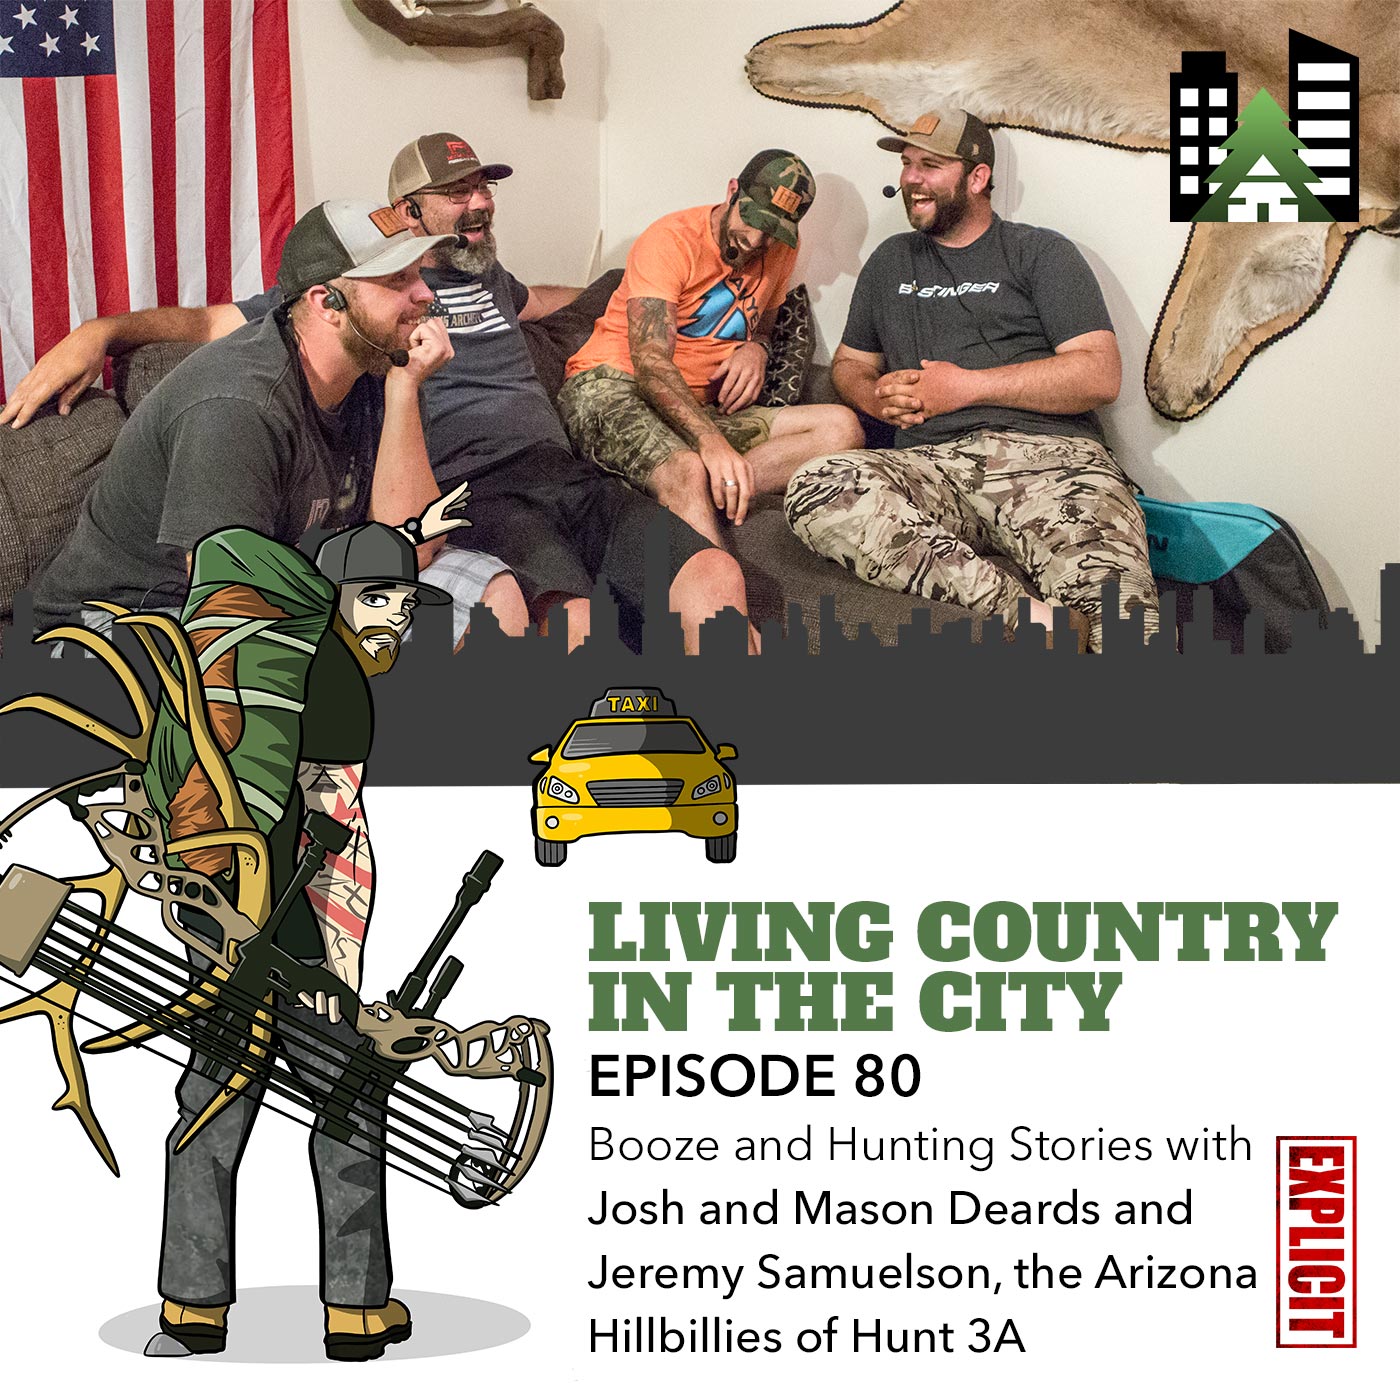 Ep 80 - Booze and Hunting Stories with Josh and Mason Deards and Jeremy Samuelson, the Arizona Hillbillies of Hunt 3A